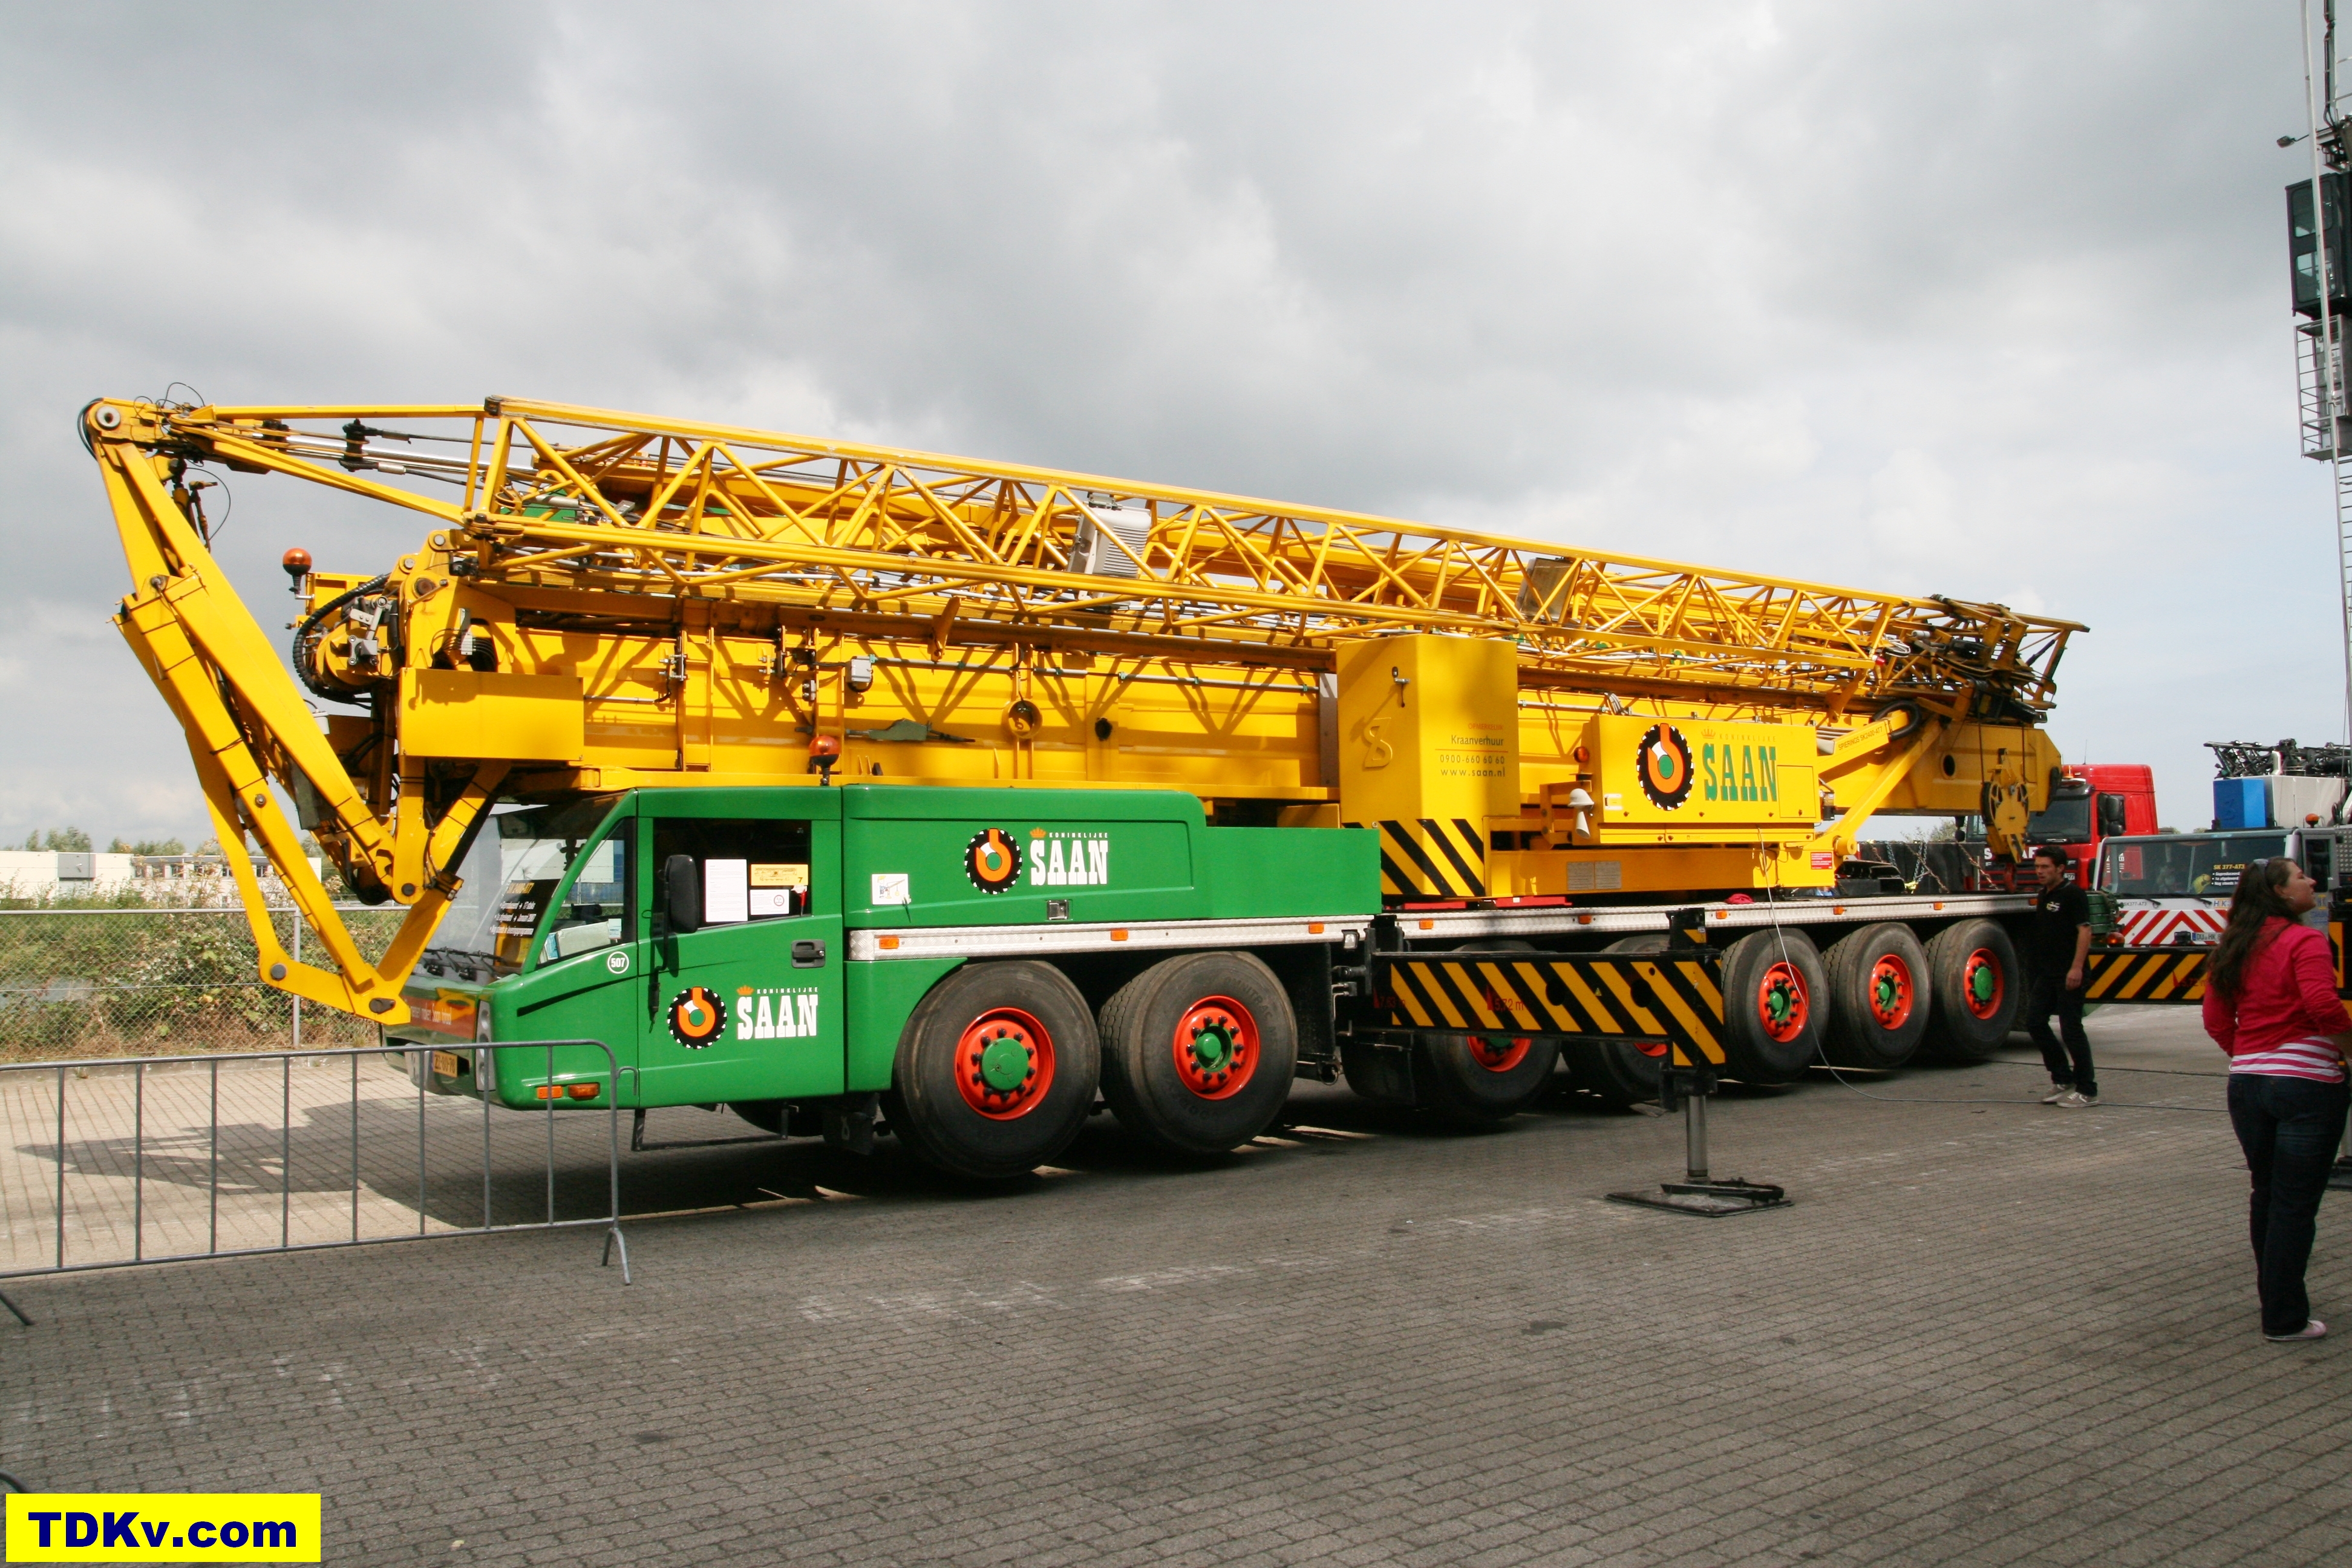 Spierings mobile tower crane SK2400-AT7 from Saan